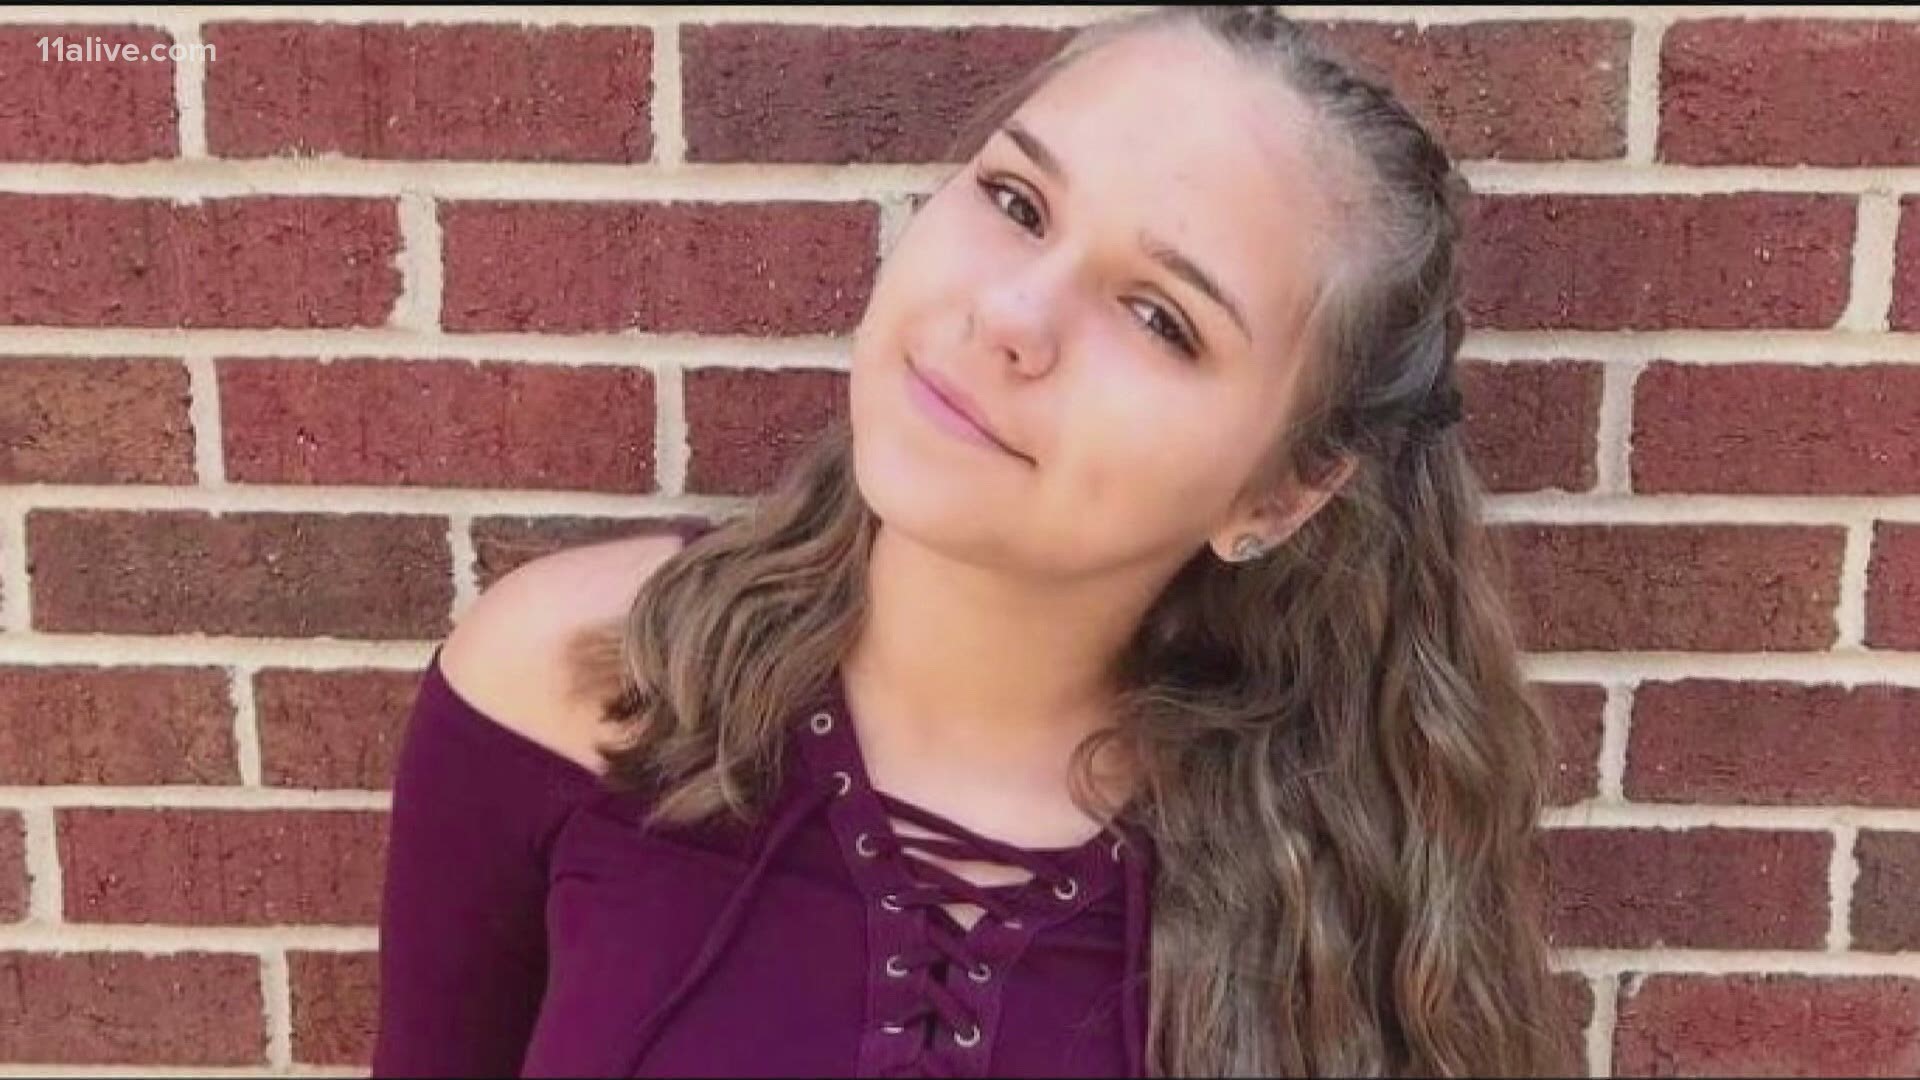 Candace Chrzan and a friend were target practicing when the weapon was accidentally fired, resulting in Chrzan's death, according to Carroll County authorities.